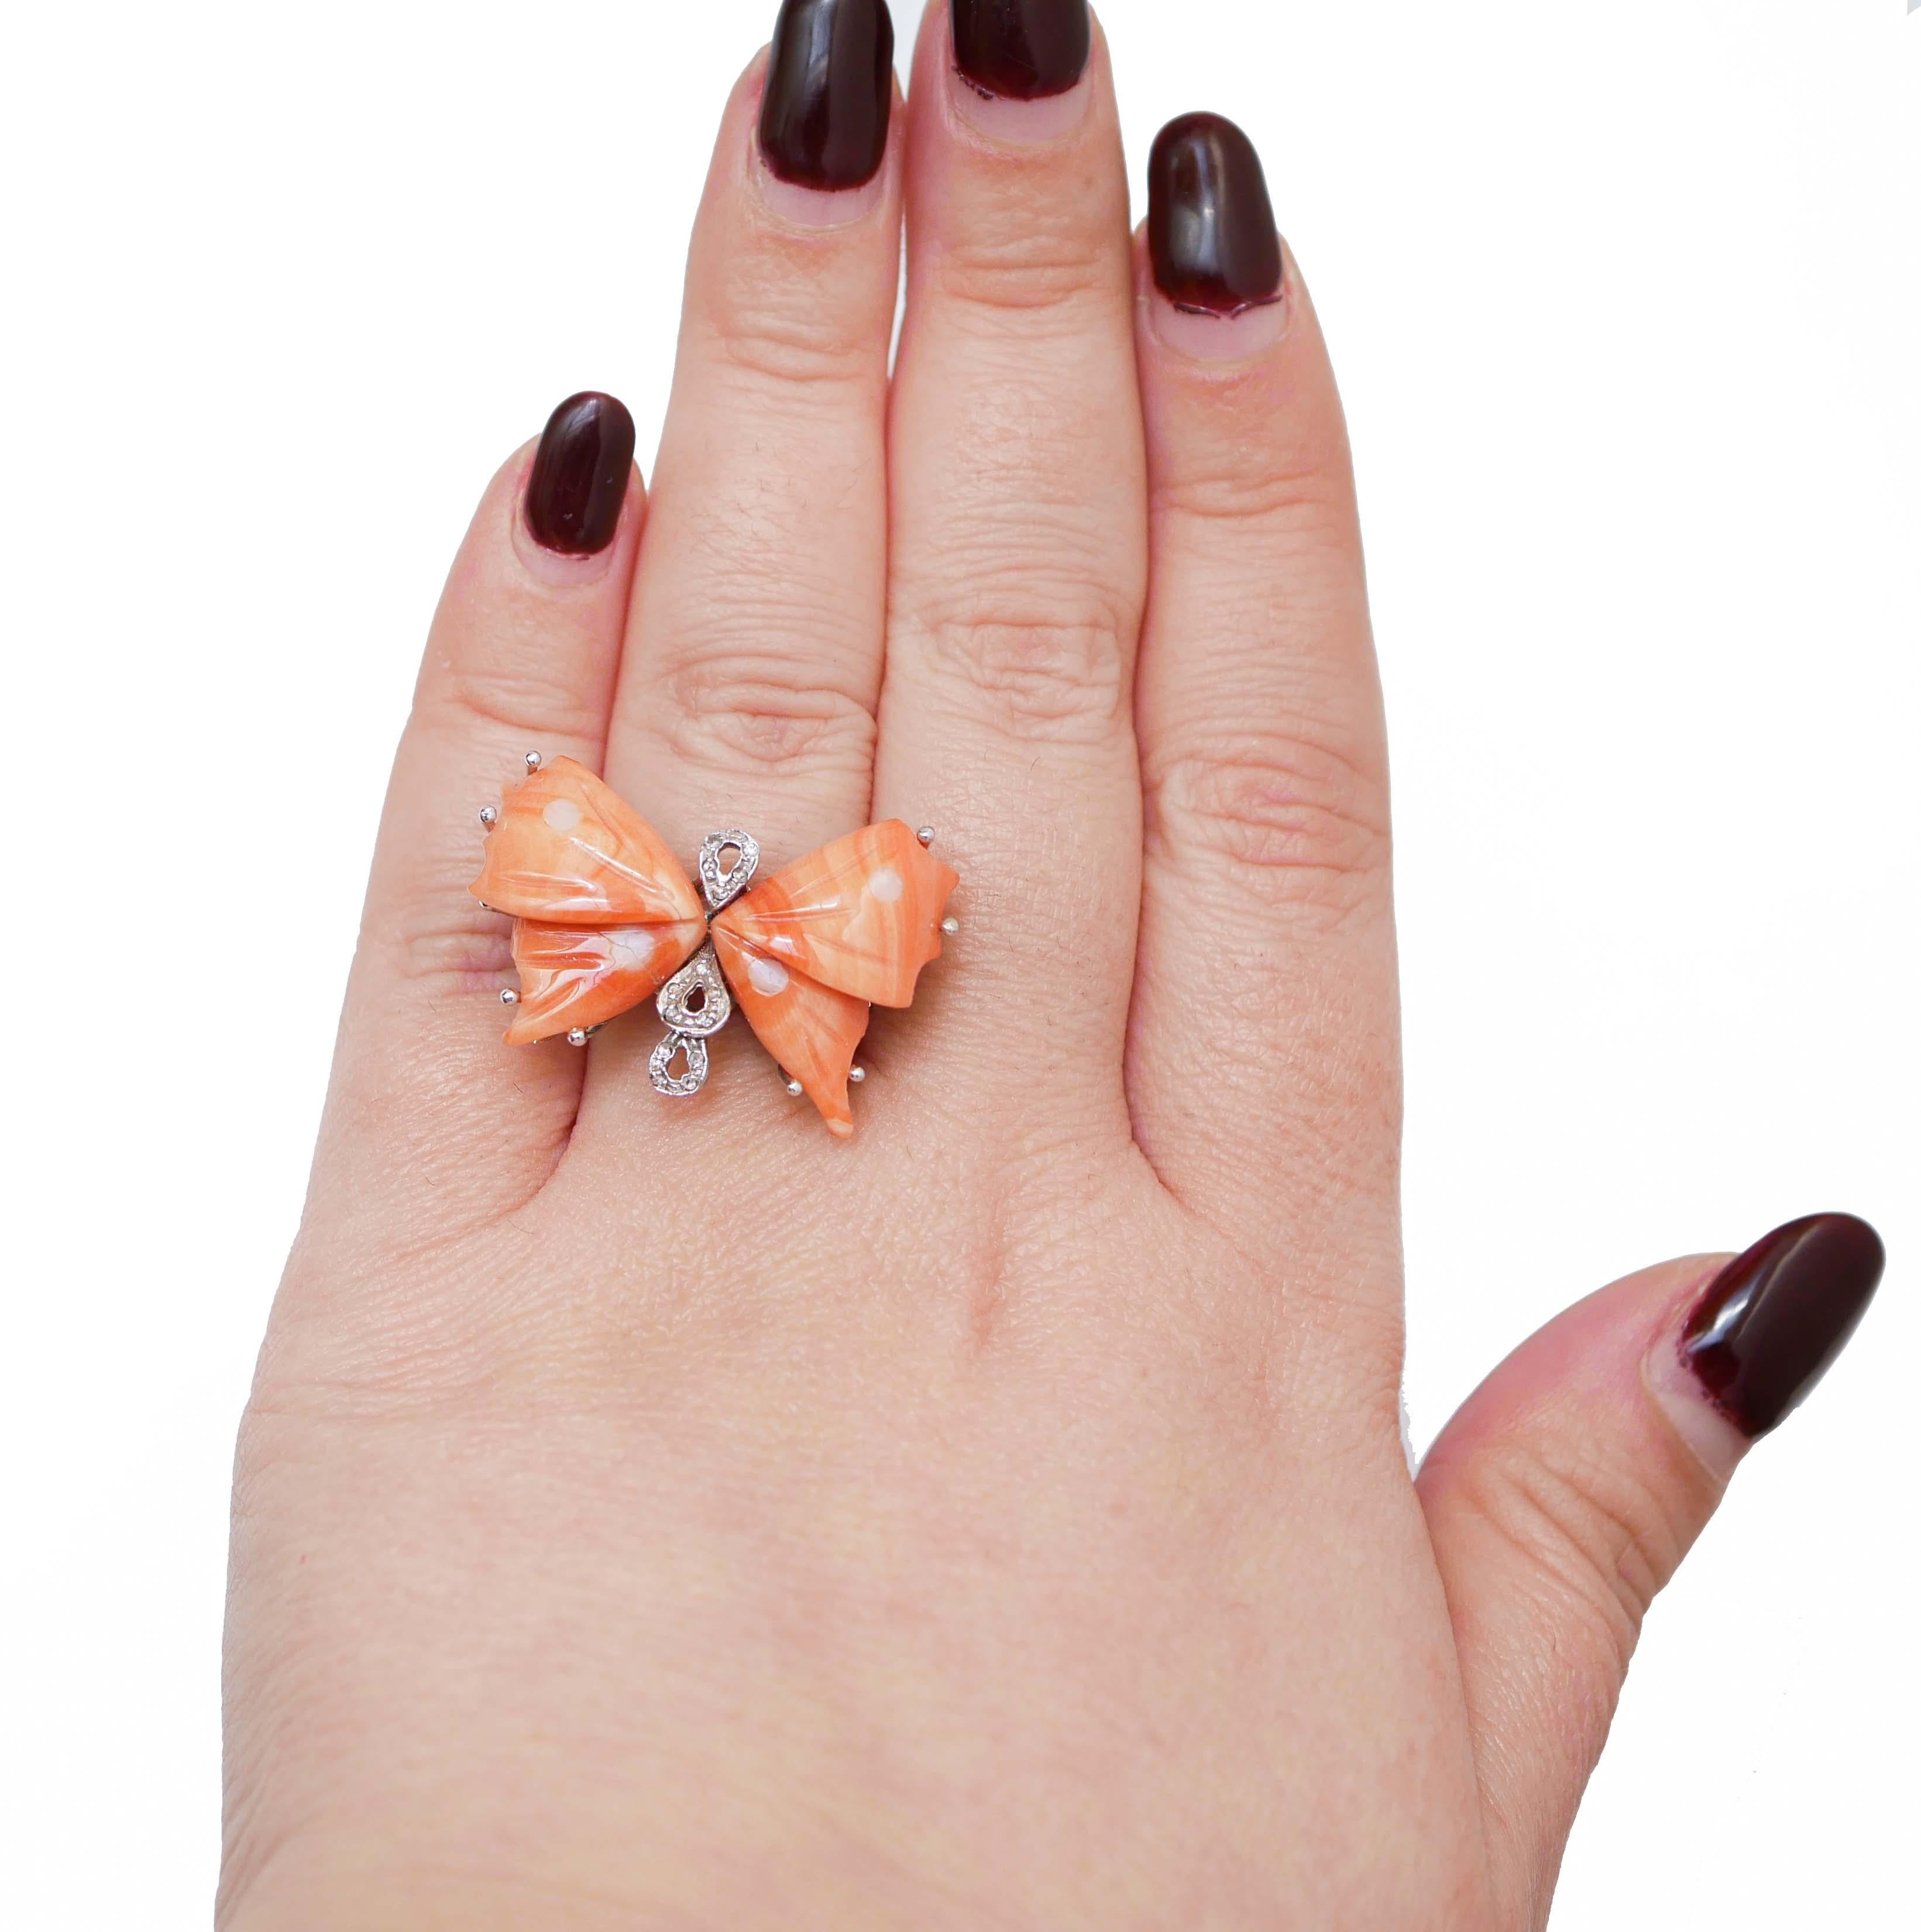 Mixed Cut Coral, Diamonds, 14 Karat White Gold Butterfly Ring. For Sale